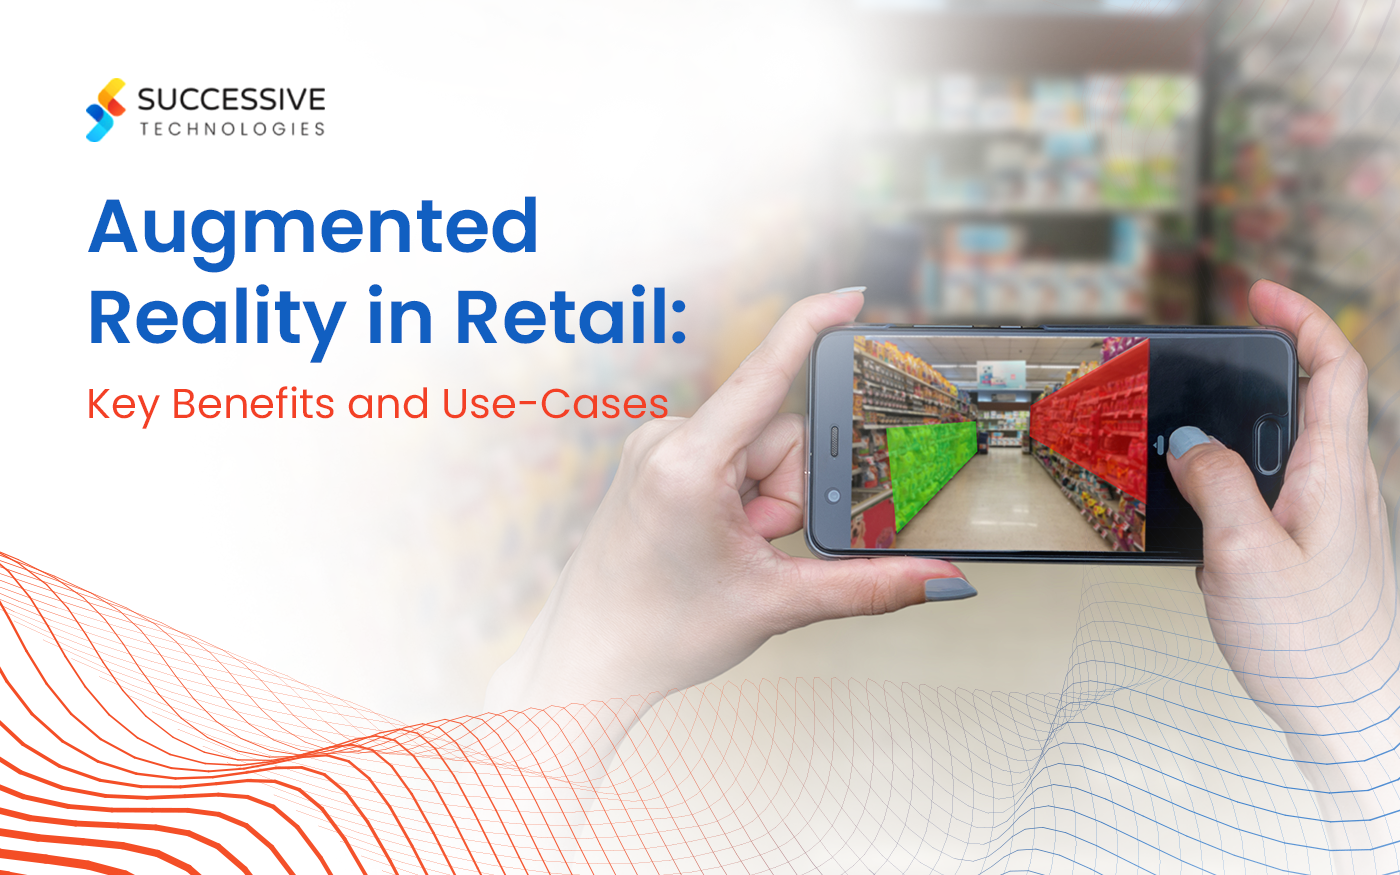 Augmented Reality in Retail: Key Benefits and Use-Cases